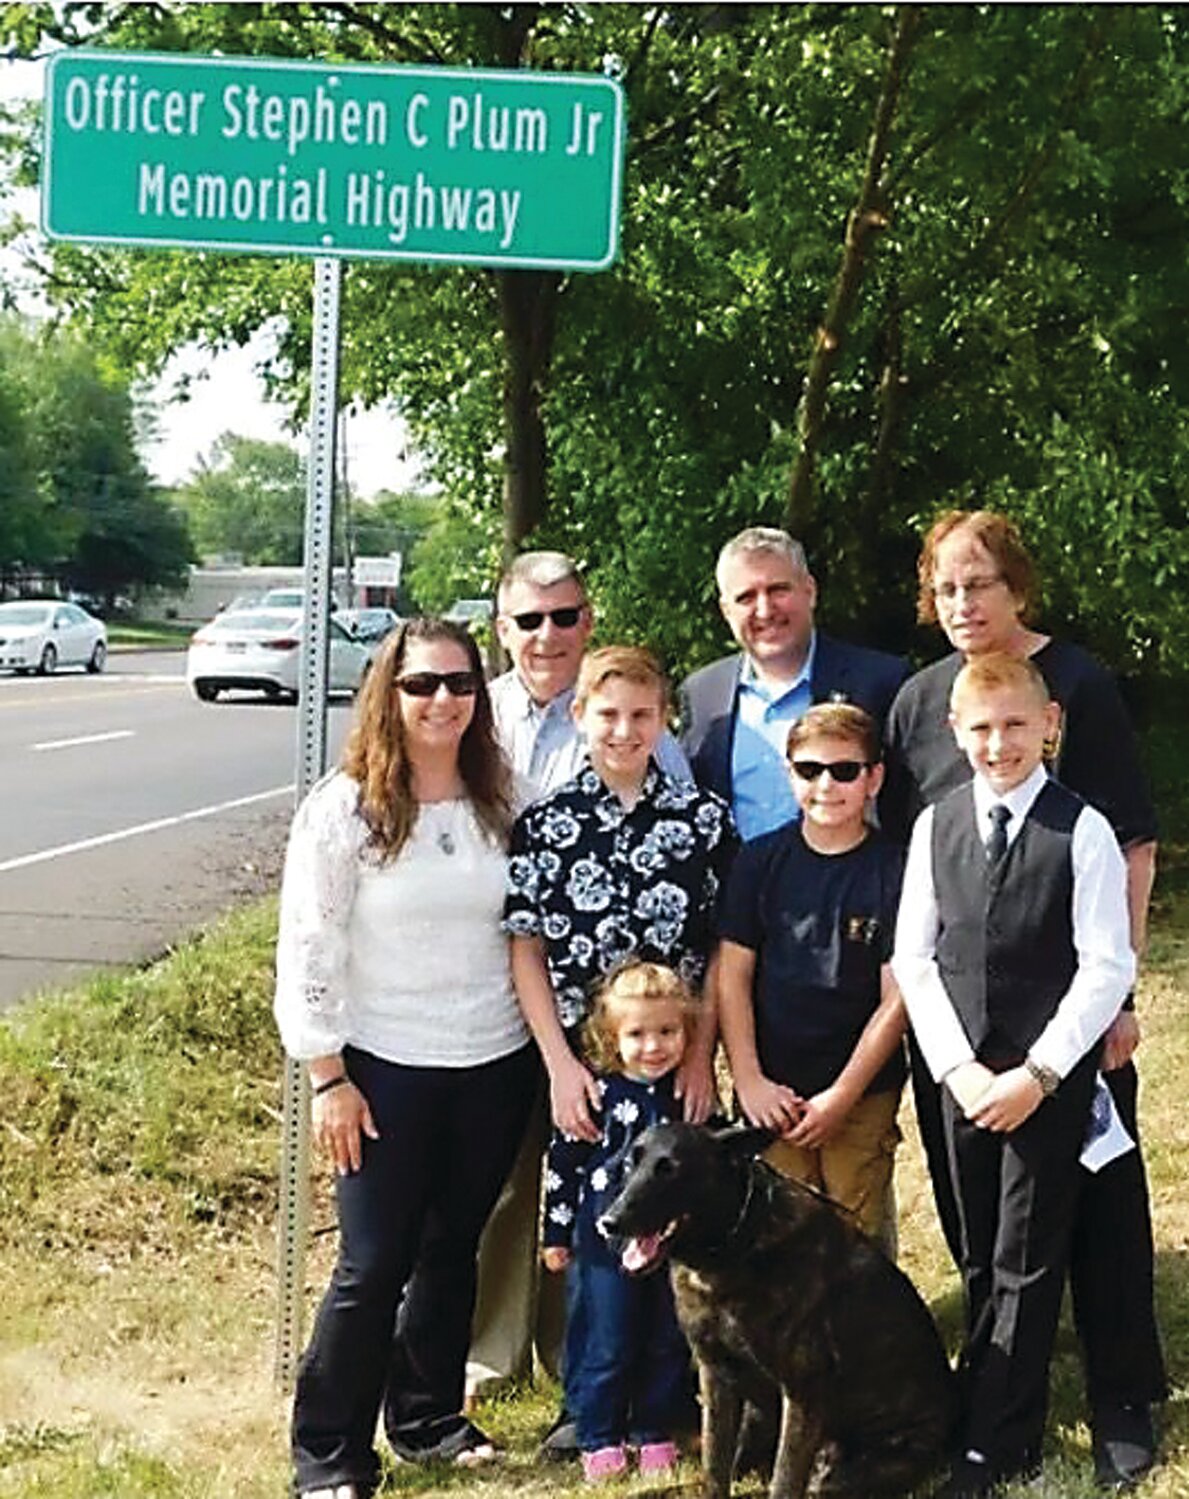 Warrington Township  officials recently renamed a section of Route 611 in honor of Officer Stephen C. Plum Jr..
From left, rear, Stephen Plum Sr., state Sen. Frank A. Farry, Leslie Watt, Nancy Plum and four of the couples’ five children — Aiden, Emmett, Wyatt and Francesca. Andrew was unable to attend. Murphy was Officer Plum’s K-9 officer.